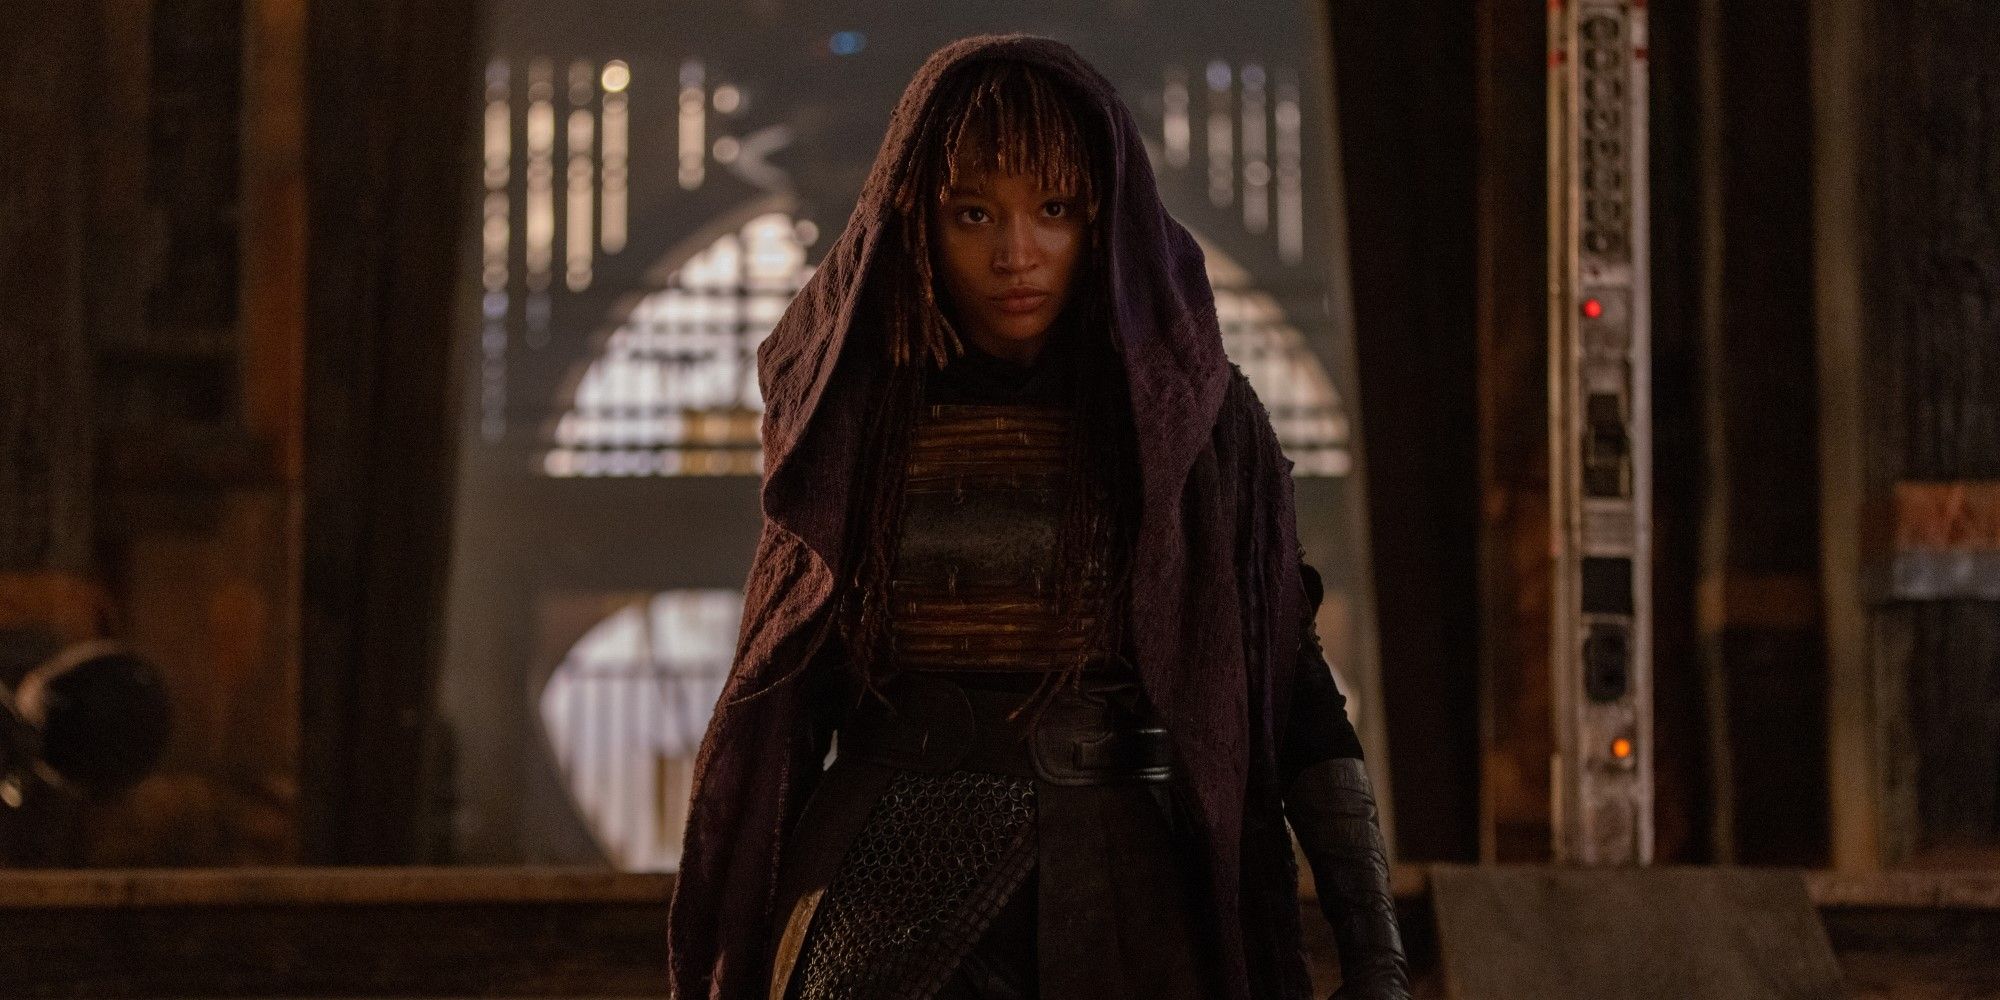 Mae (Amandla Stenberg) stands in front of an entryway while wearing her hood in The Acolyte